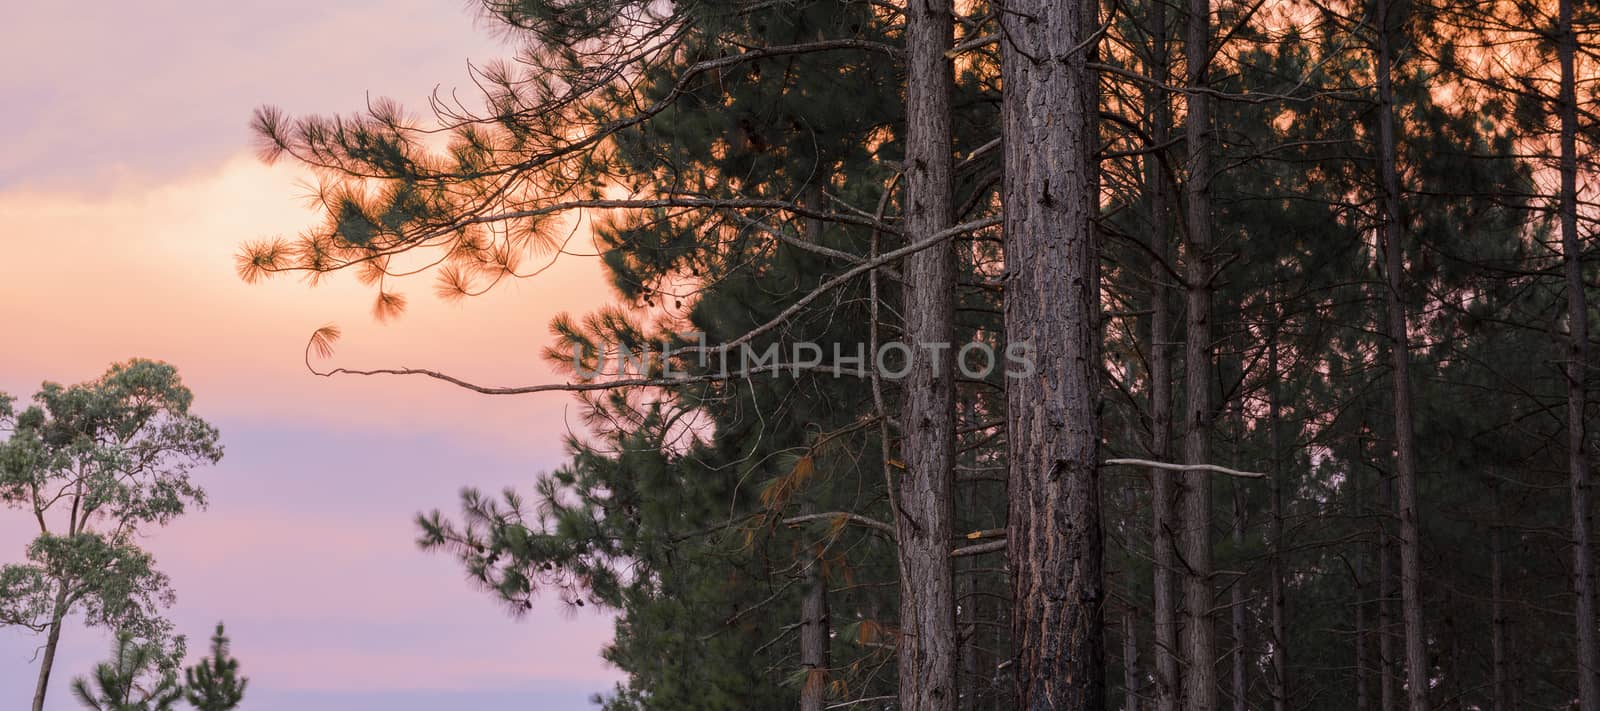 Pine tree forest in the late afternoon in the Sunshine Coast, Queensland.